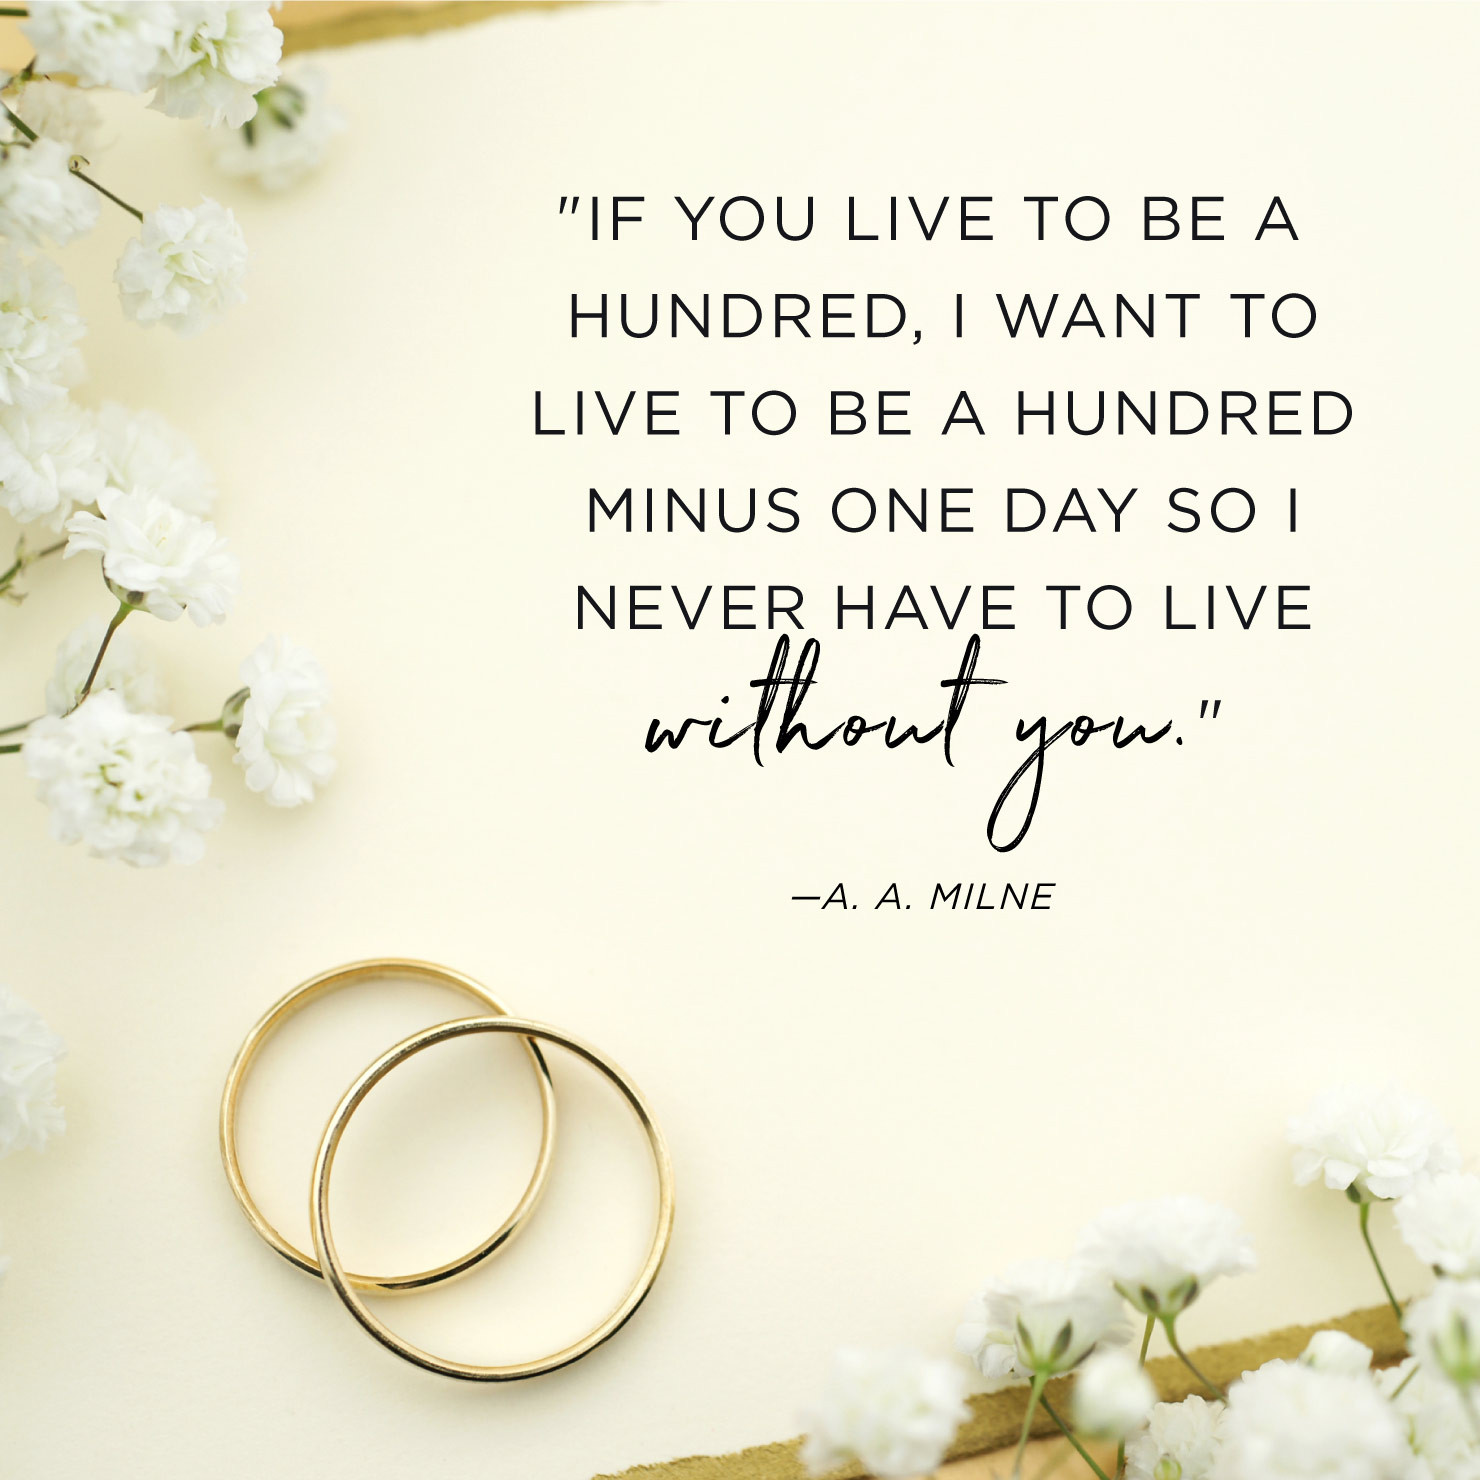 Anniversary Quotes For Her
 60 Happy Anniversary Quotes to Celebrate Your Love